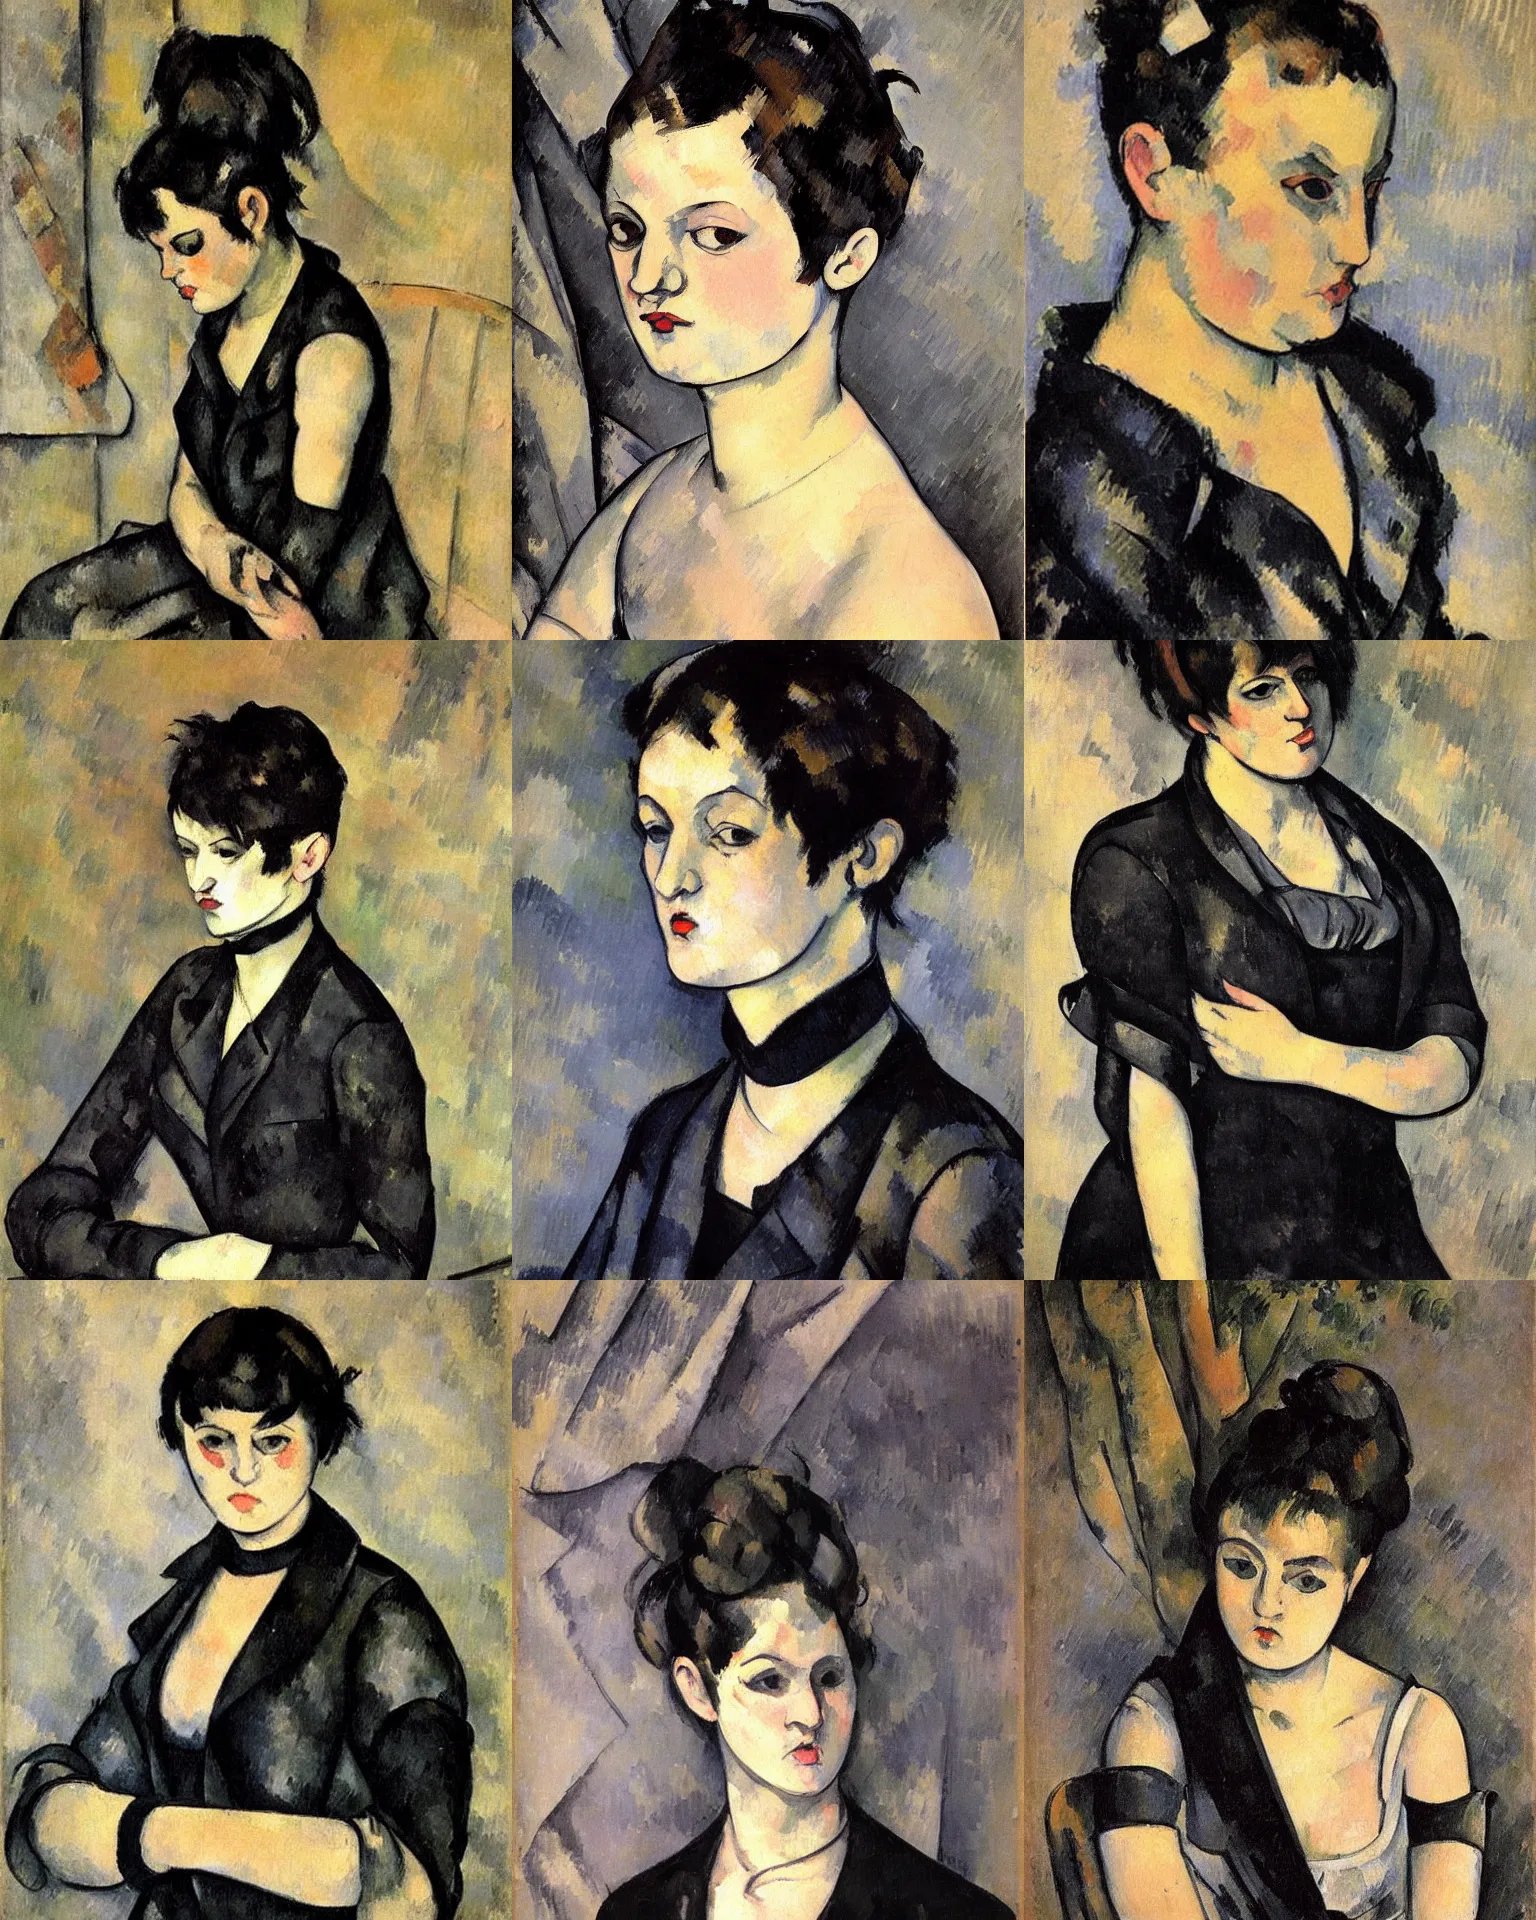 Prompt: A goth portrait painted by Paul Cezanne. Her hair is dark brown and cut into a short, messy pixie cut. She has a slightly rounded face, with a pointed chin, large entirely-black eyes, and a small nose. She is wearing a black tank top, a black leather jacket, a black knee-length skirt, a black choker, and black leather boots.